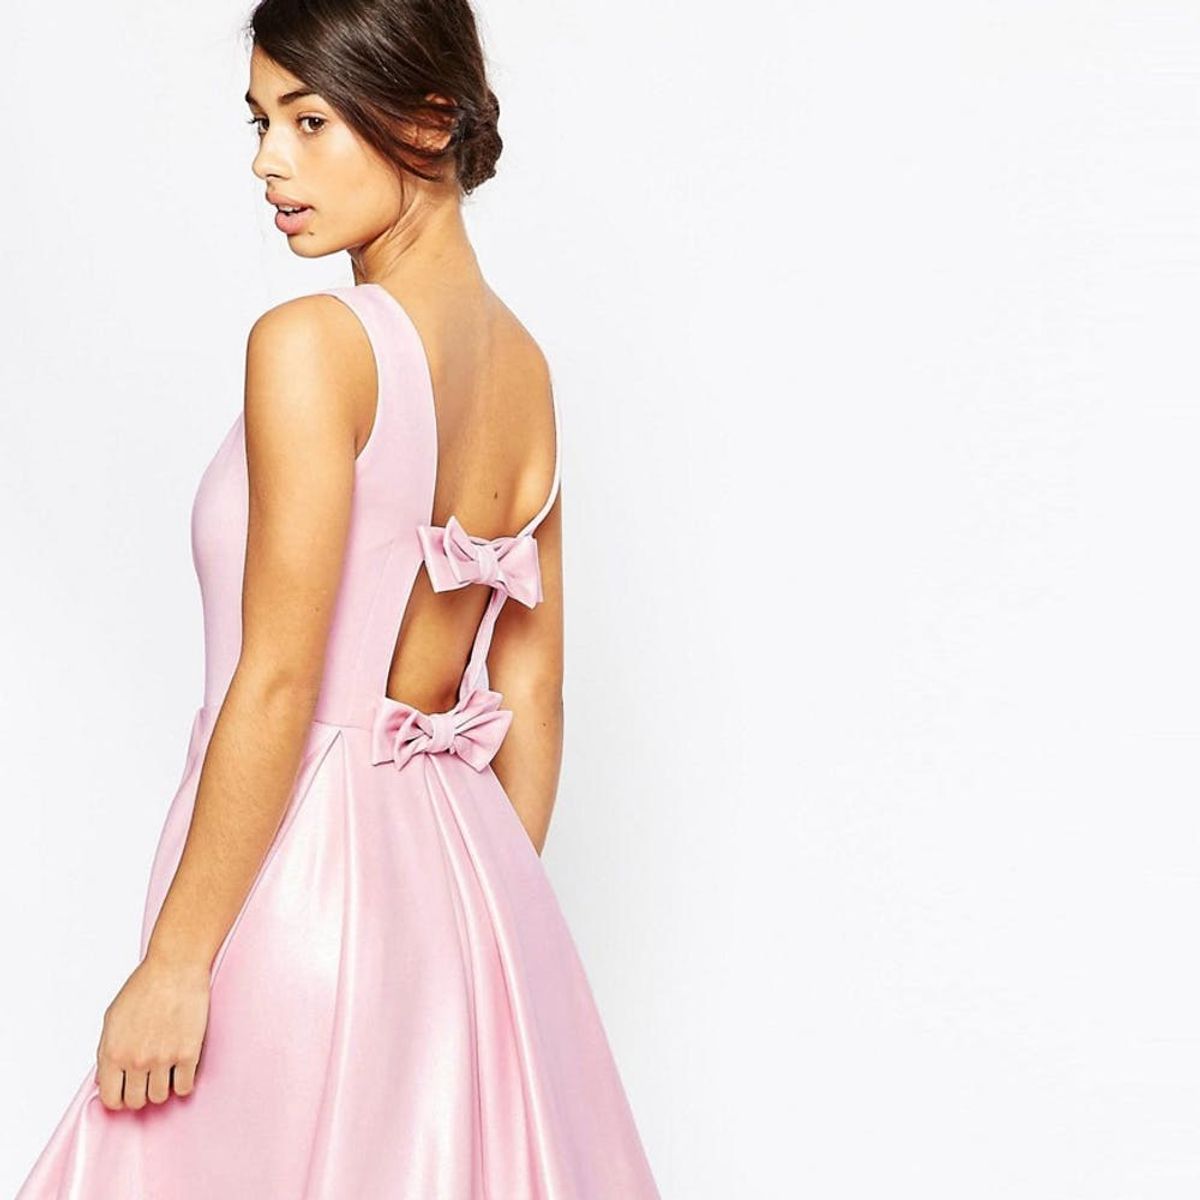 16 Prom Dresses That Are All About the Party in the Back